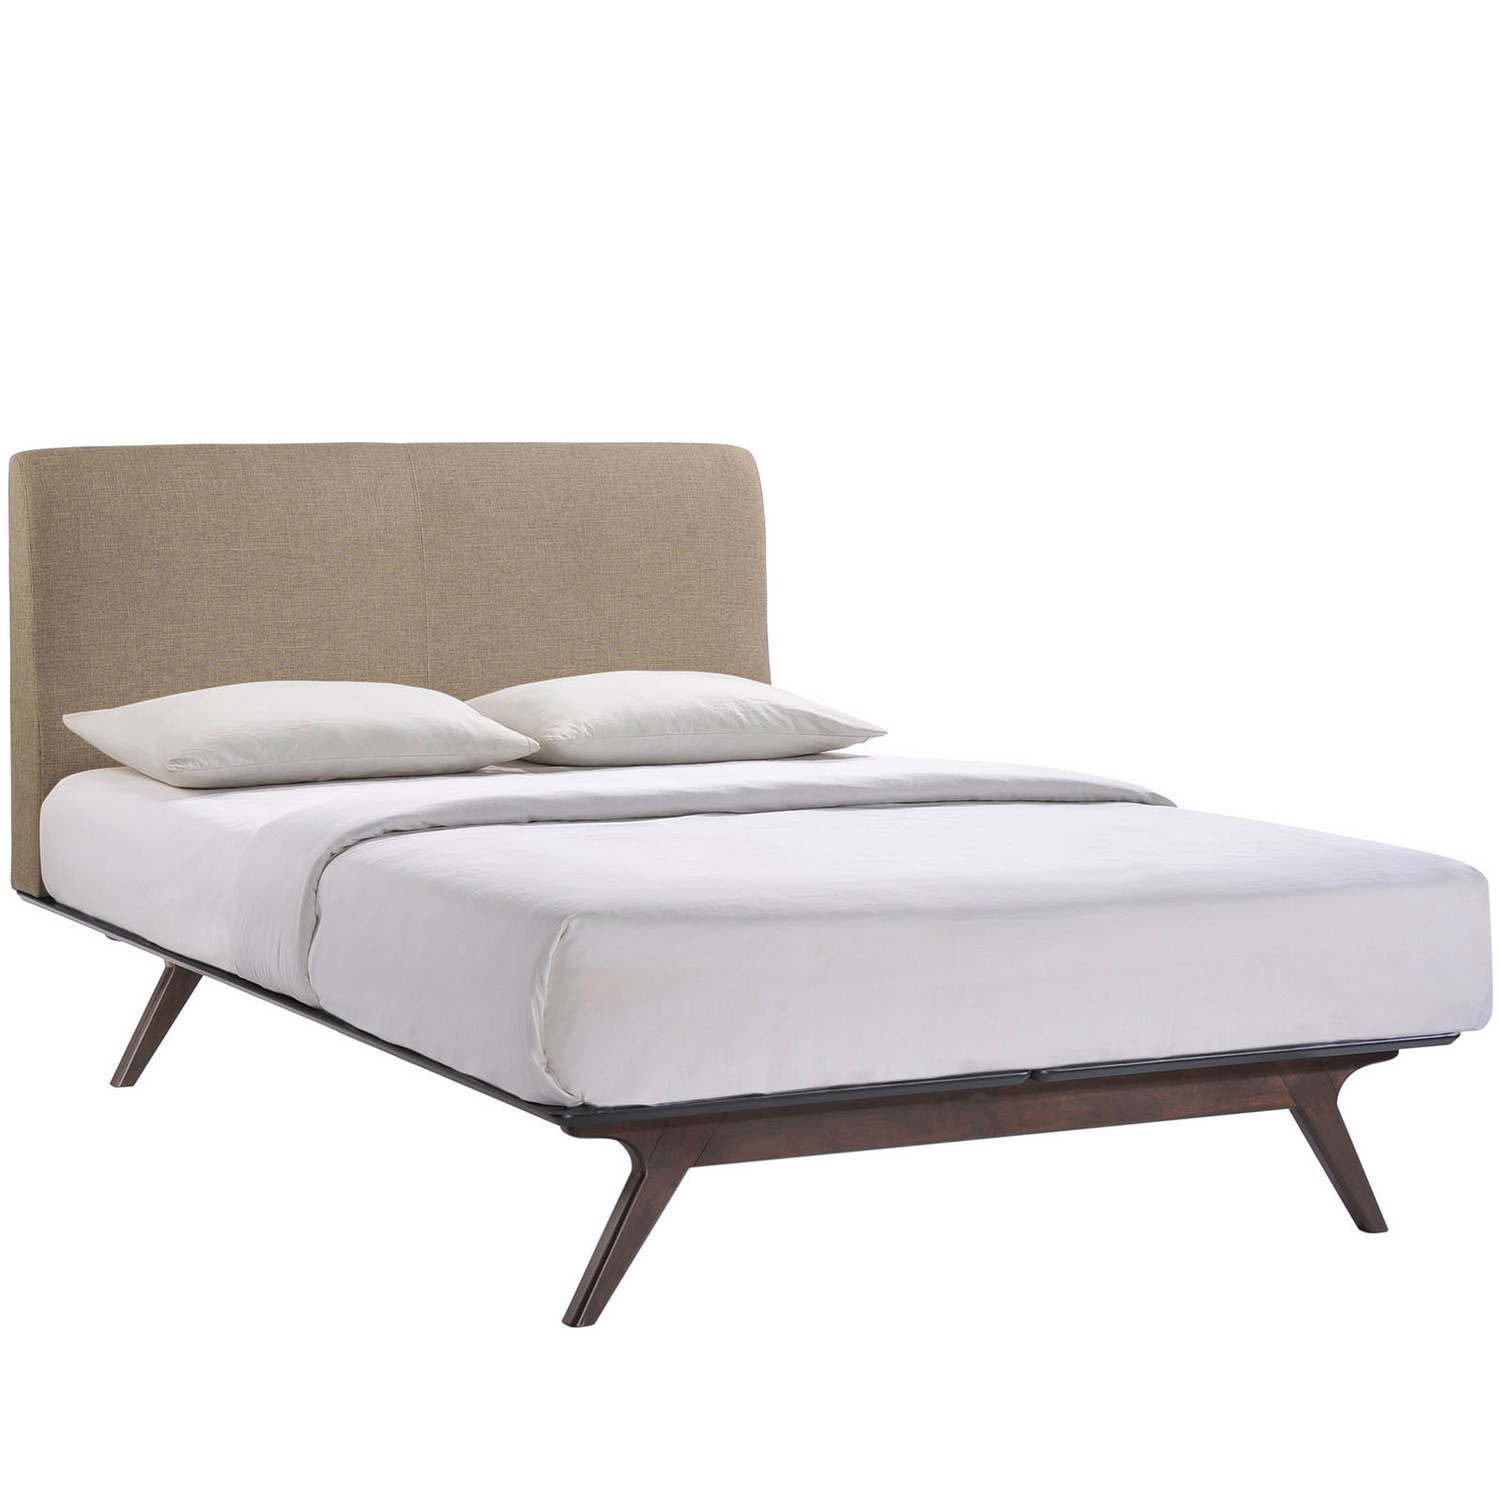 Modway Tracy Queen Bed - Cappuccino Latte